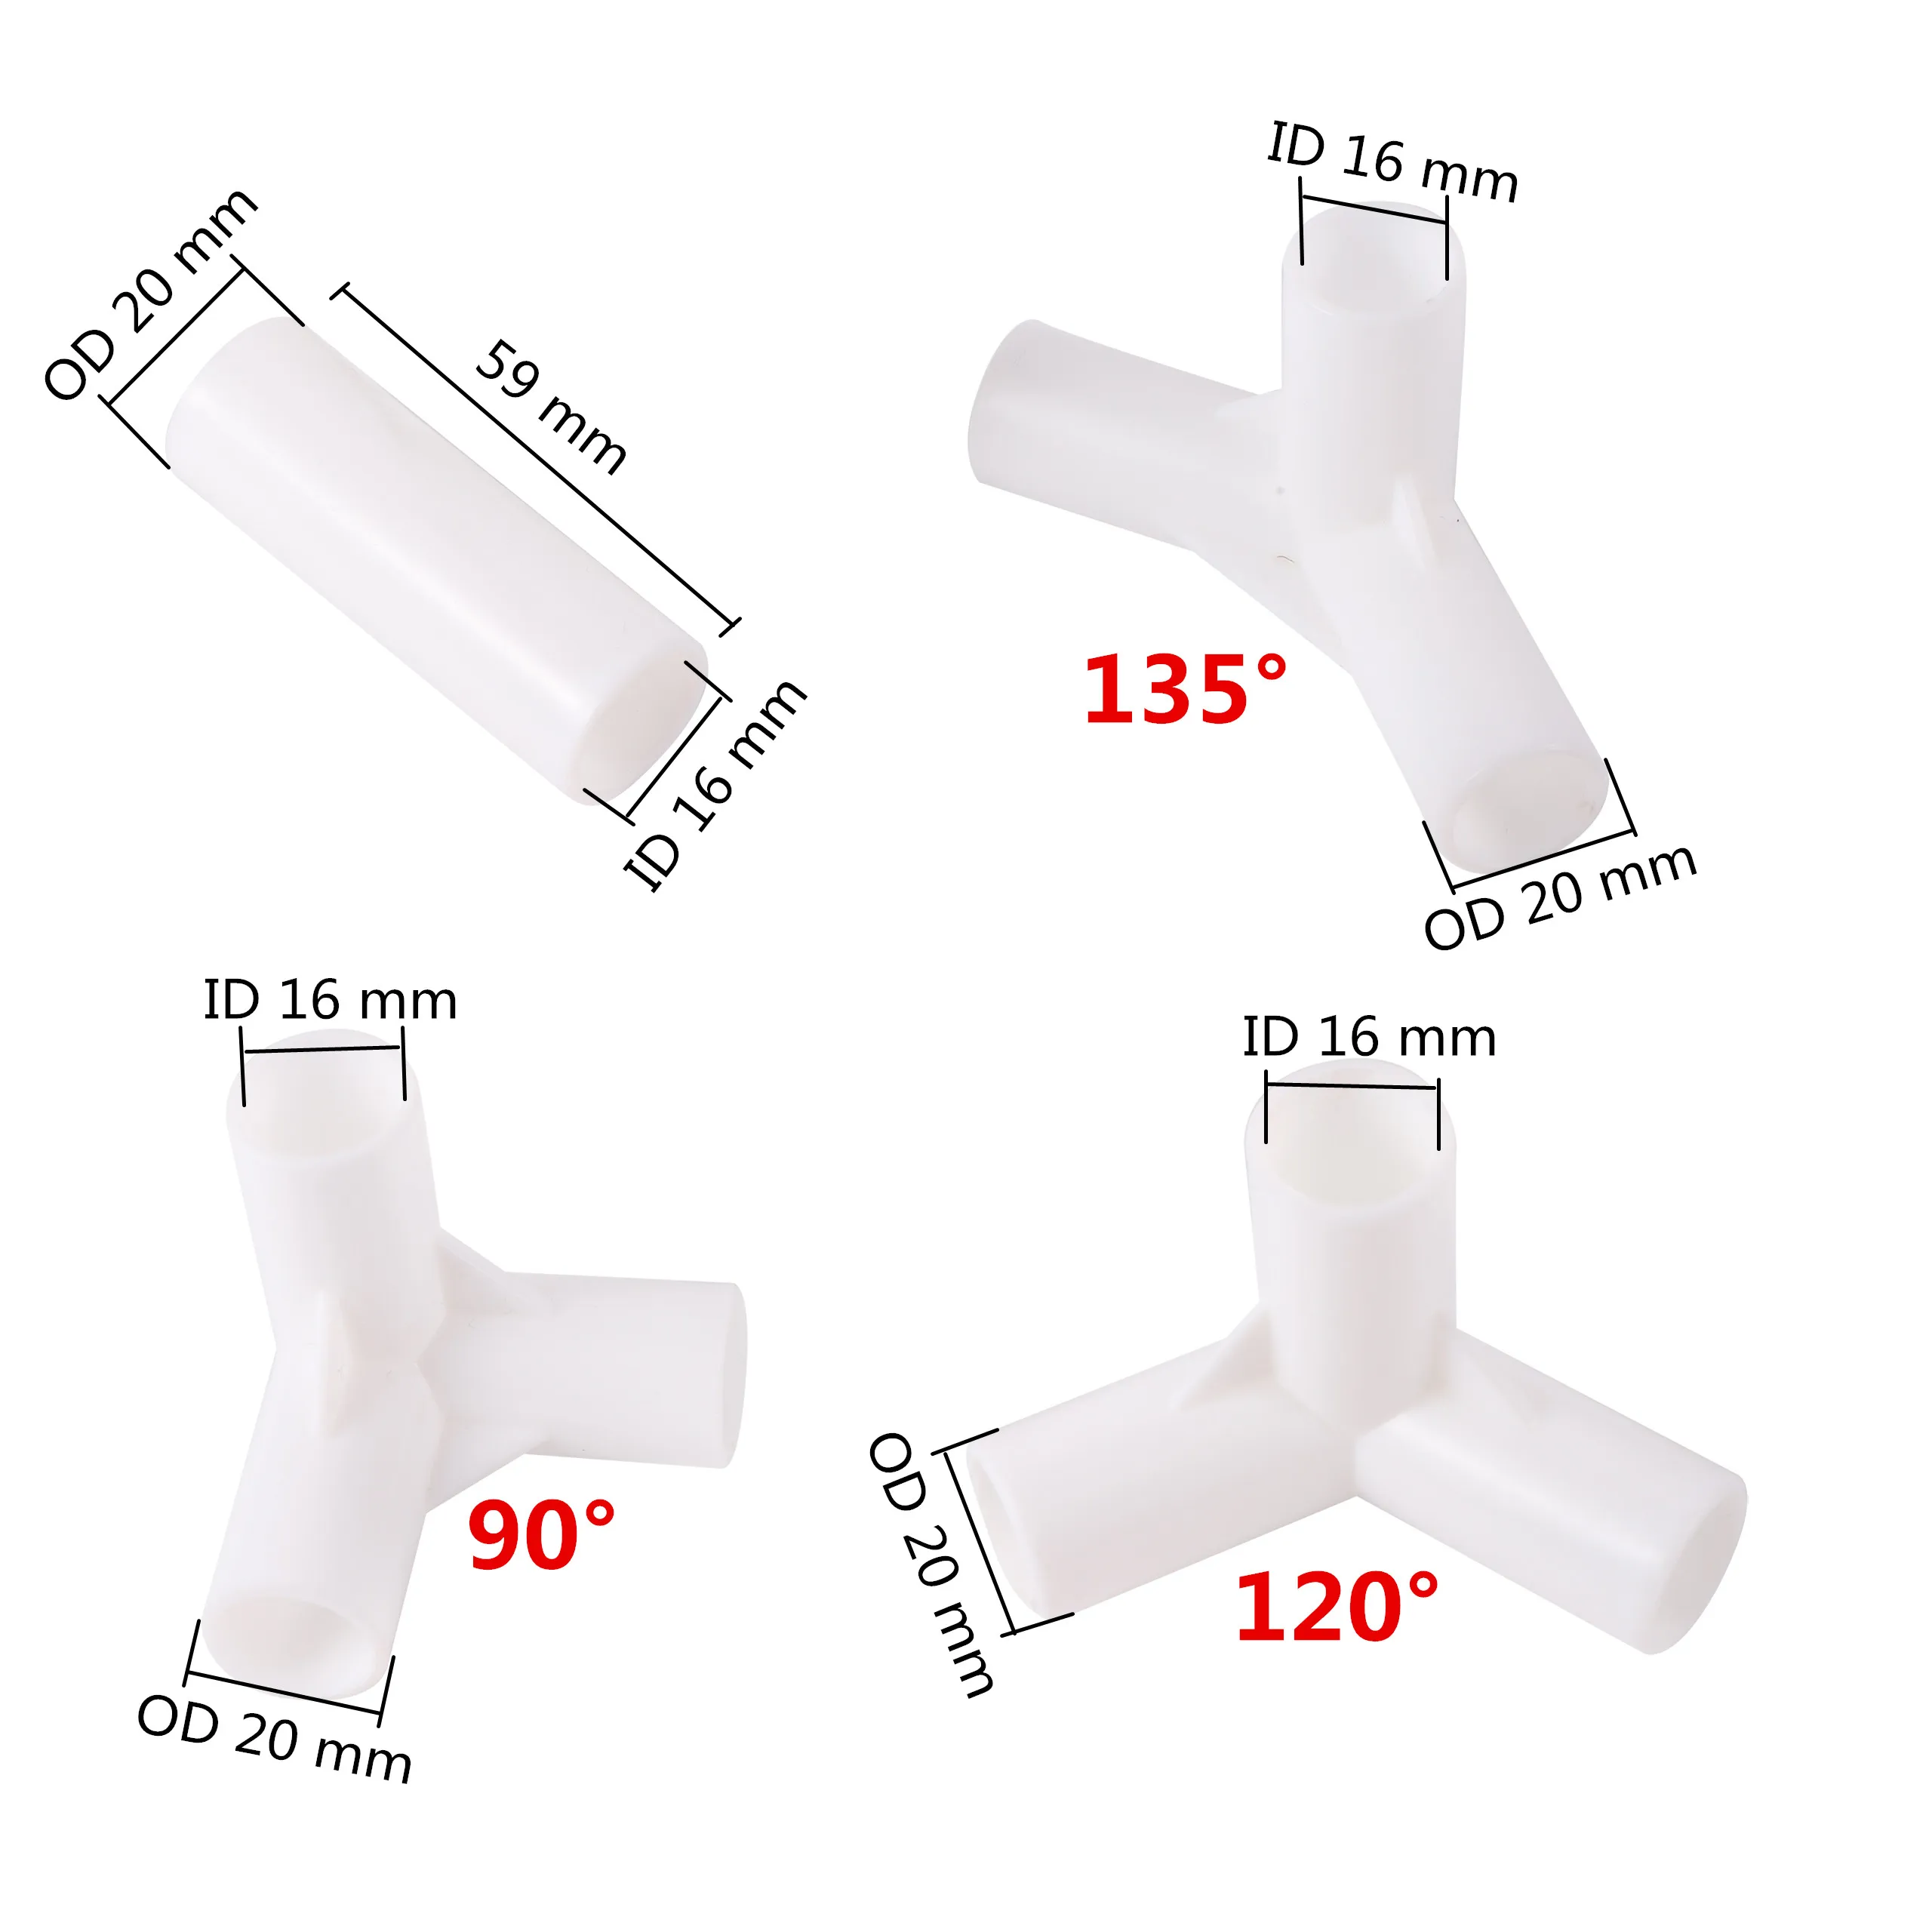 8 Ft Pvc Pipe16mm Pvc Pipe Fittings - 100pcs Straight/elbow/tee Connectors  For Diy Tent